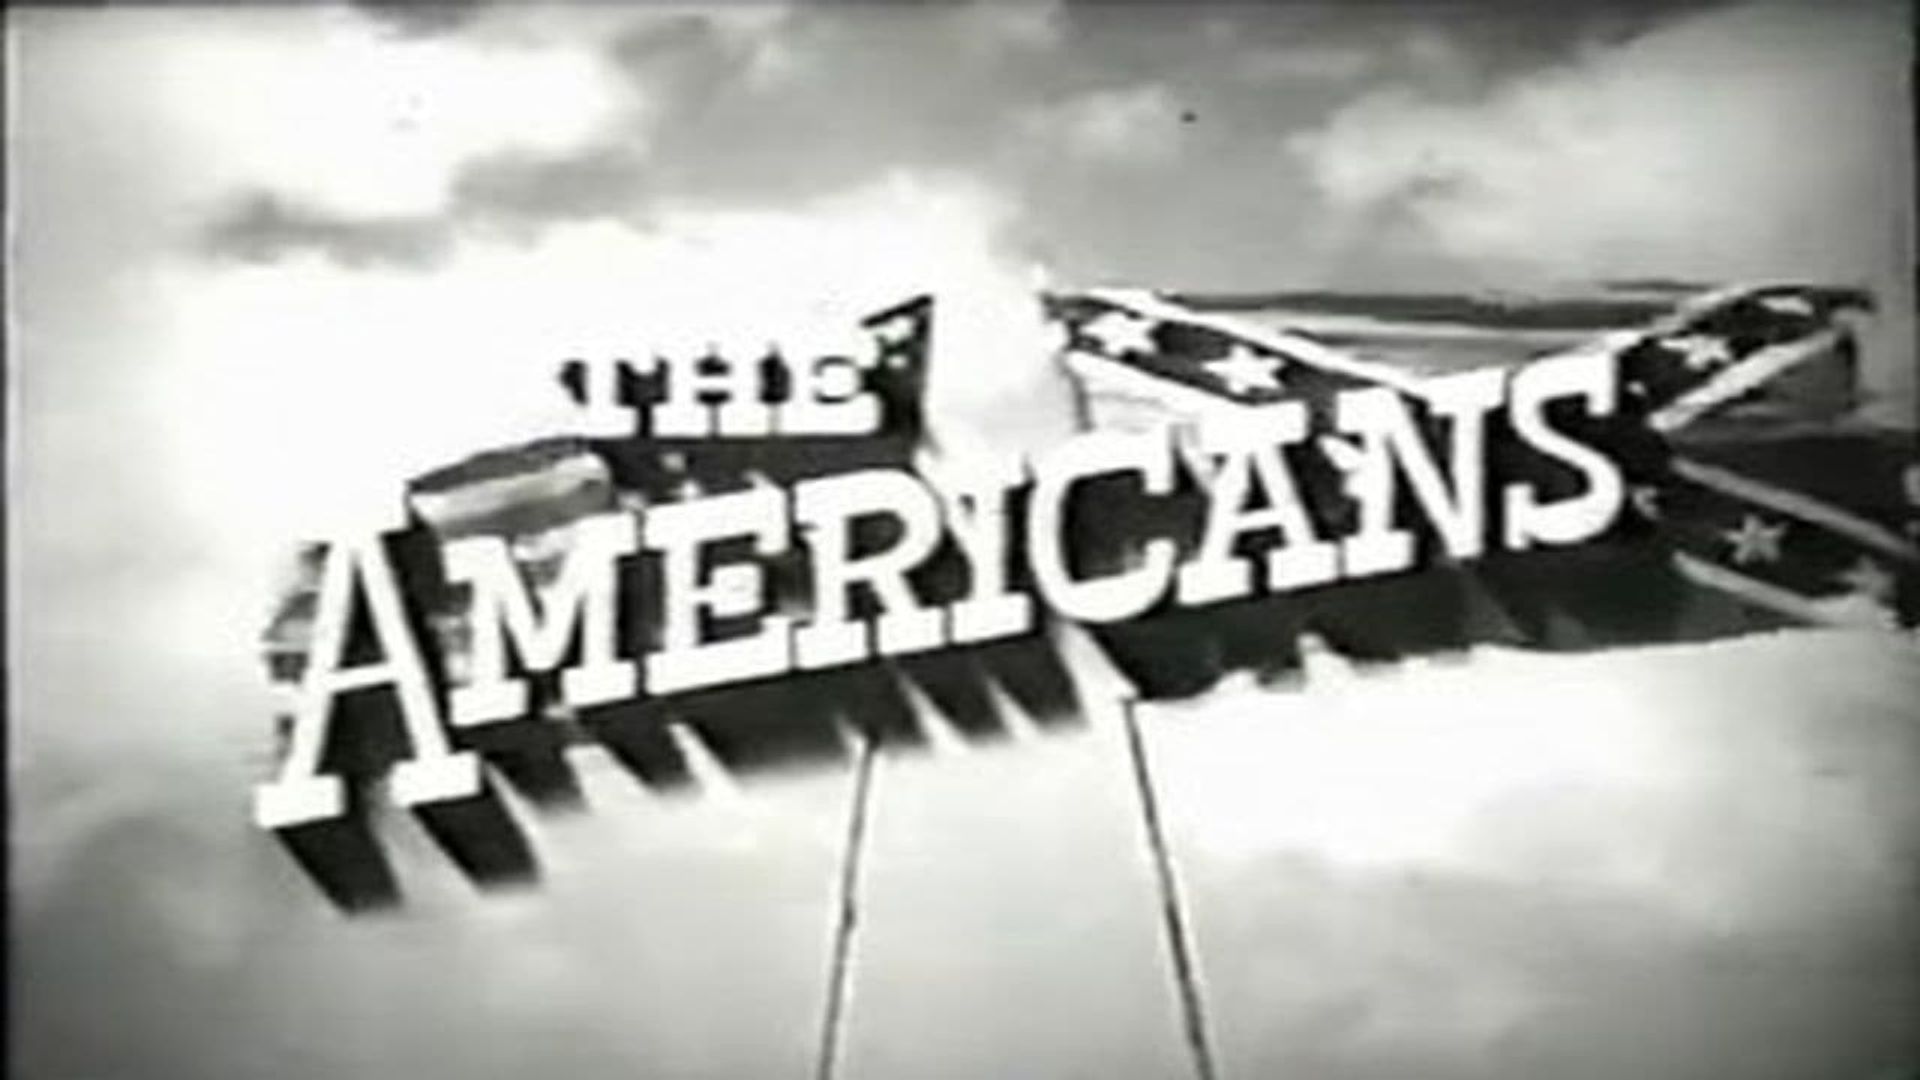 The Americans background